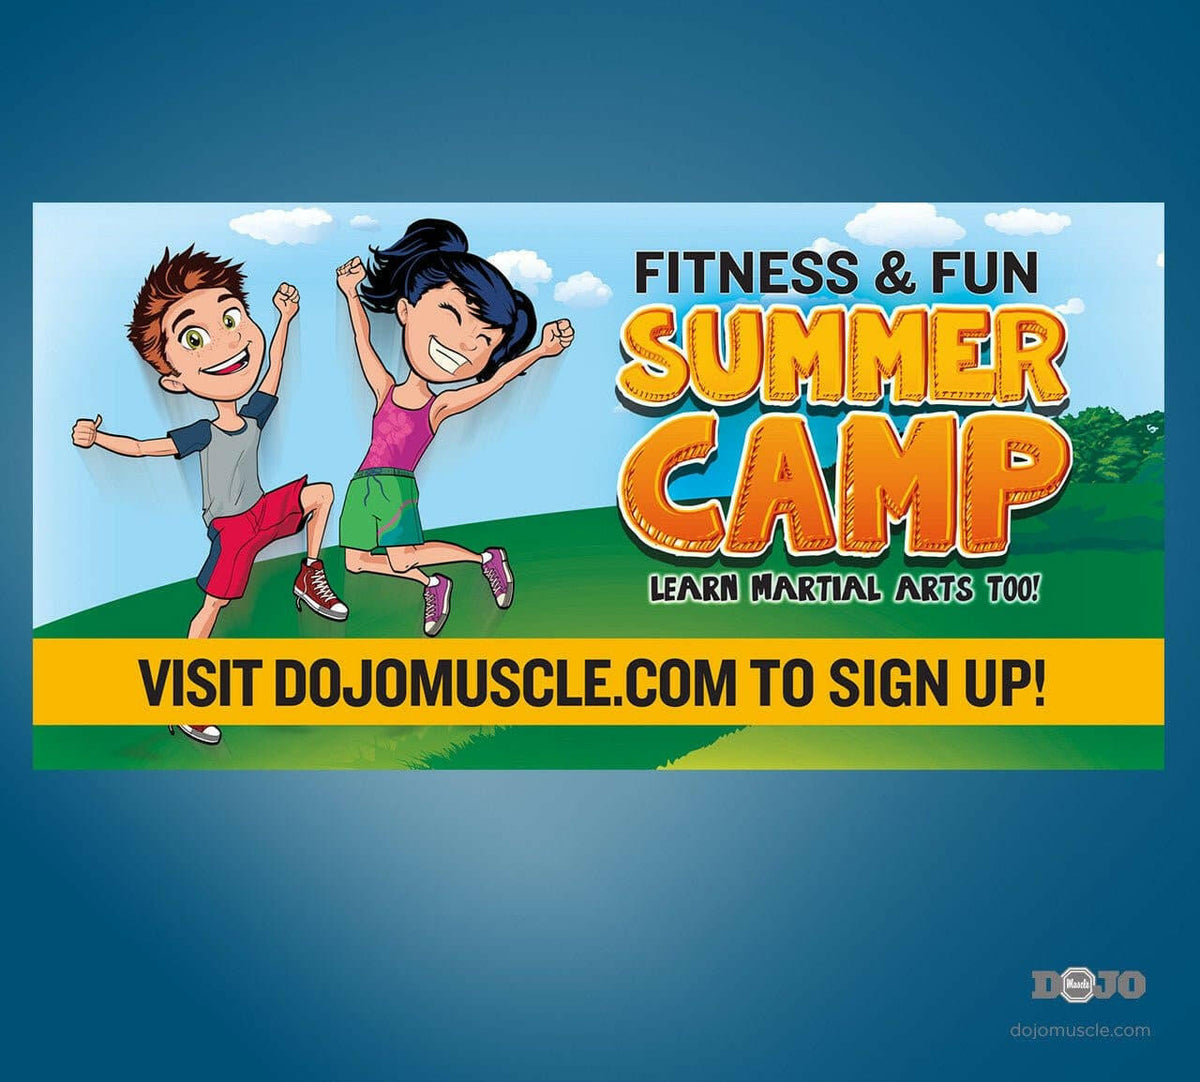 Fun and Fitness Summer Camp Banner - Dojo Muscle